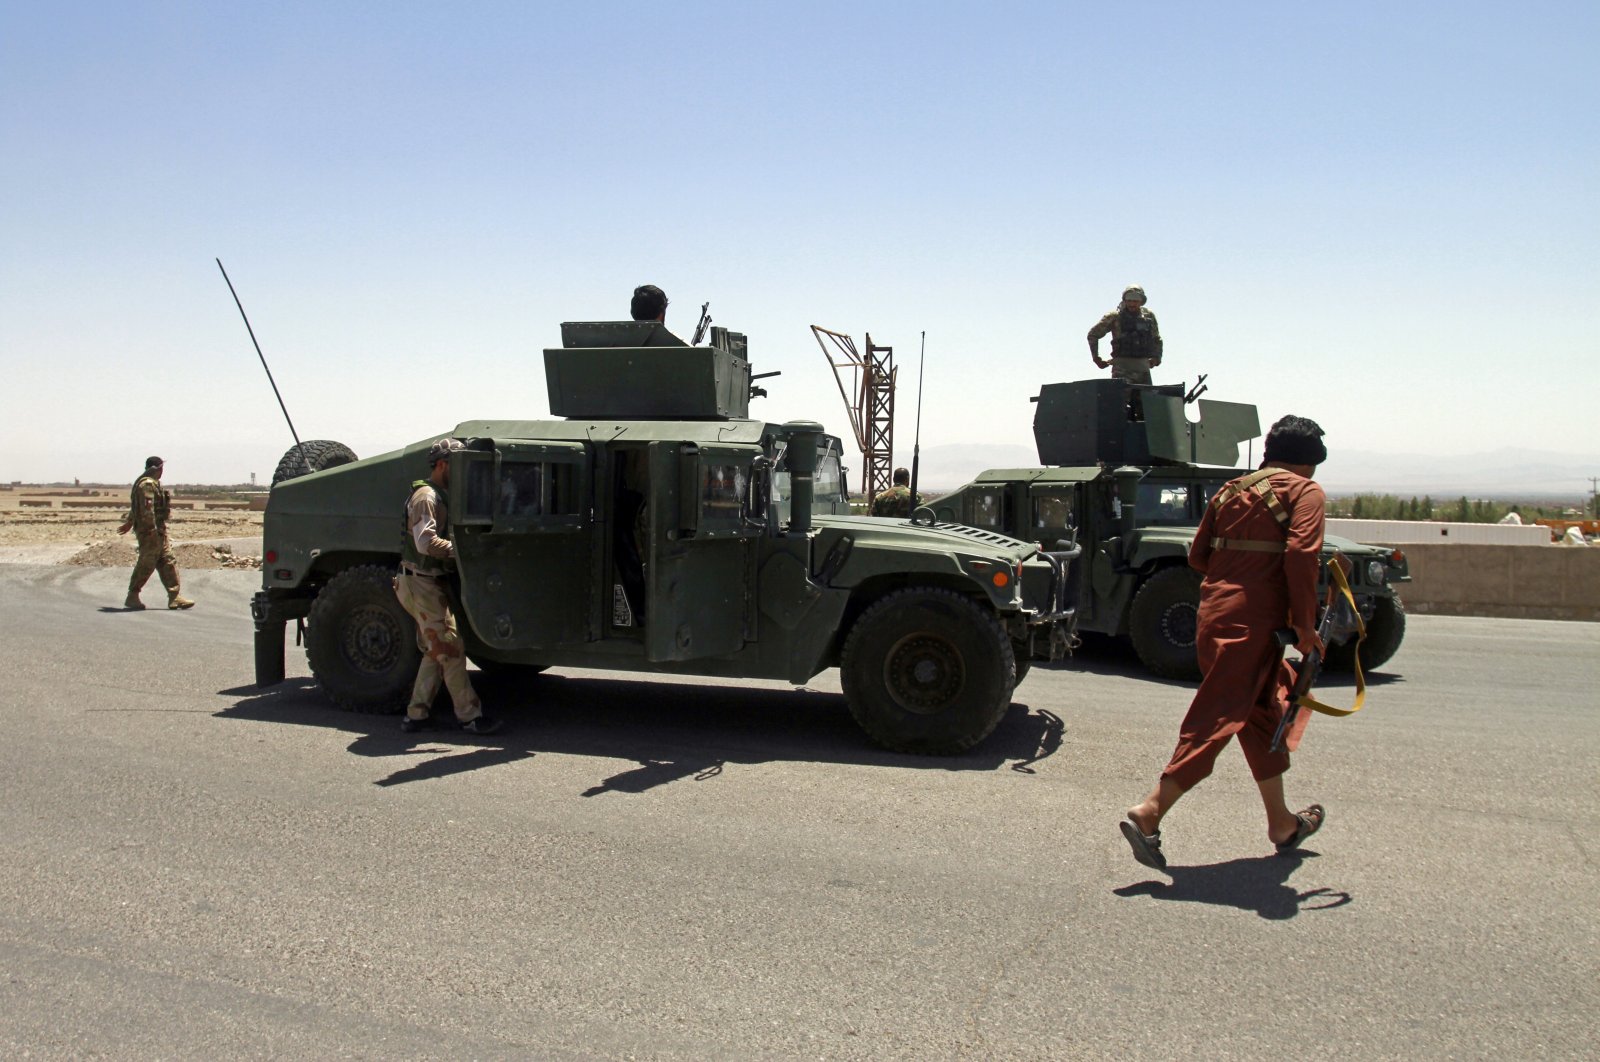 Afghan security personnel patrol after they took back control of parts of the city of Herat following fighting between Taliban and Afghan security forces, on the outskirts of Herat, 640 kilometers (397 miles) west of Kabul, Afghanistan, Aug. 8, 2021. (AP Photo)